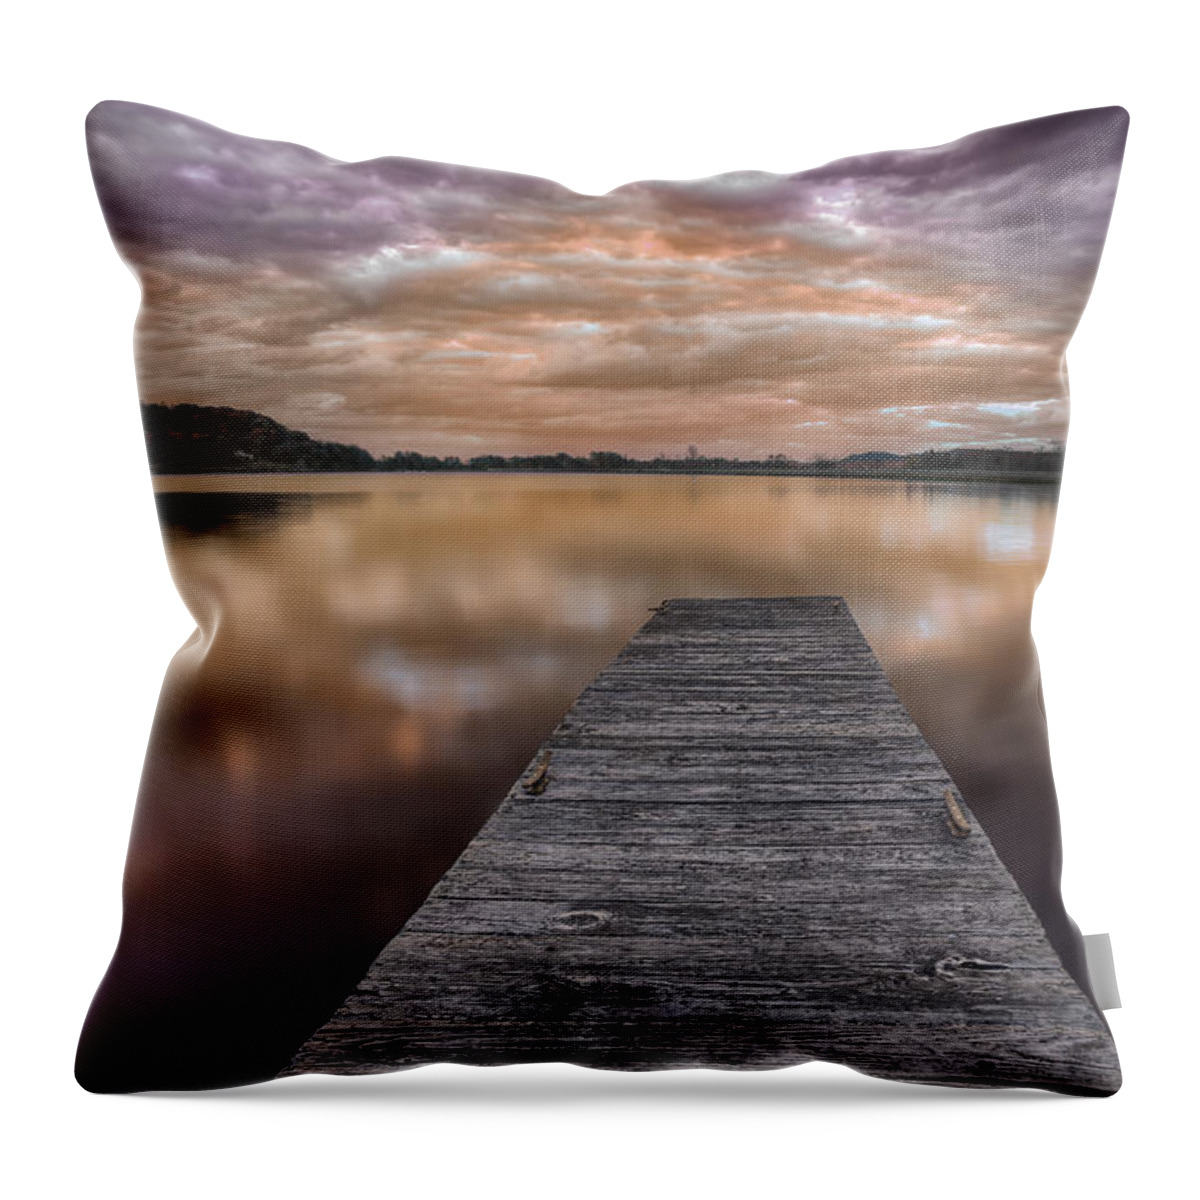 Twilight Throw Pillow featuring the photograph Lake White Twilight by Jaki Miller